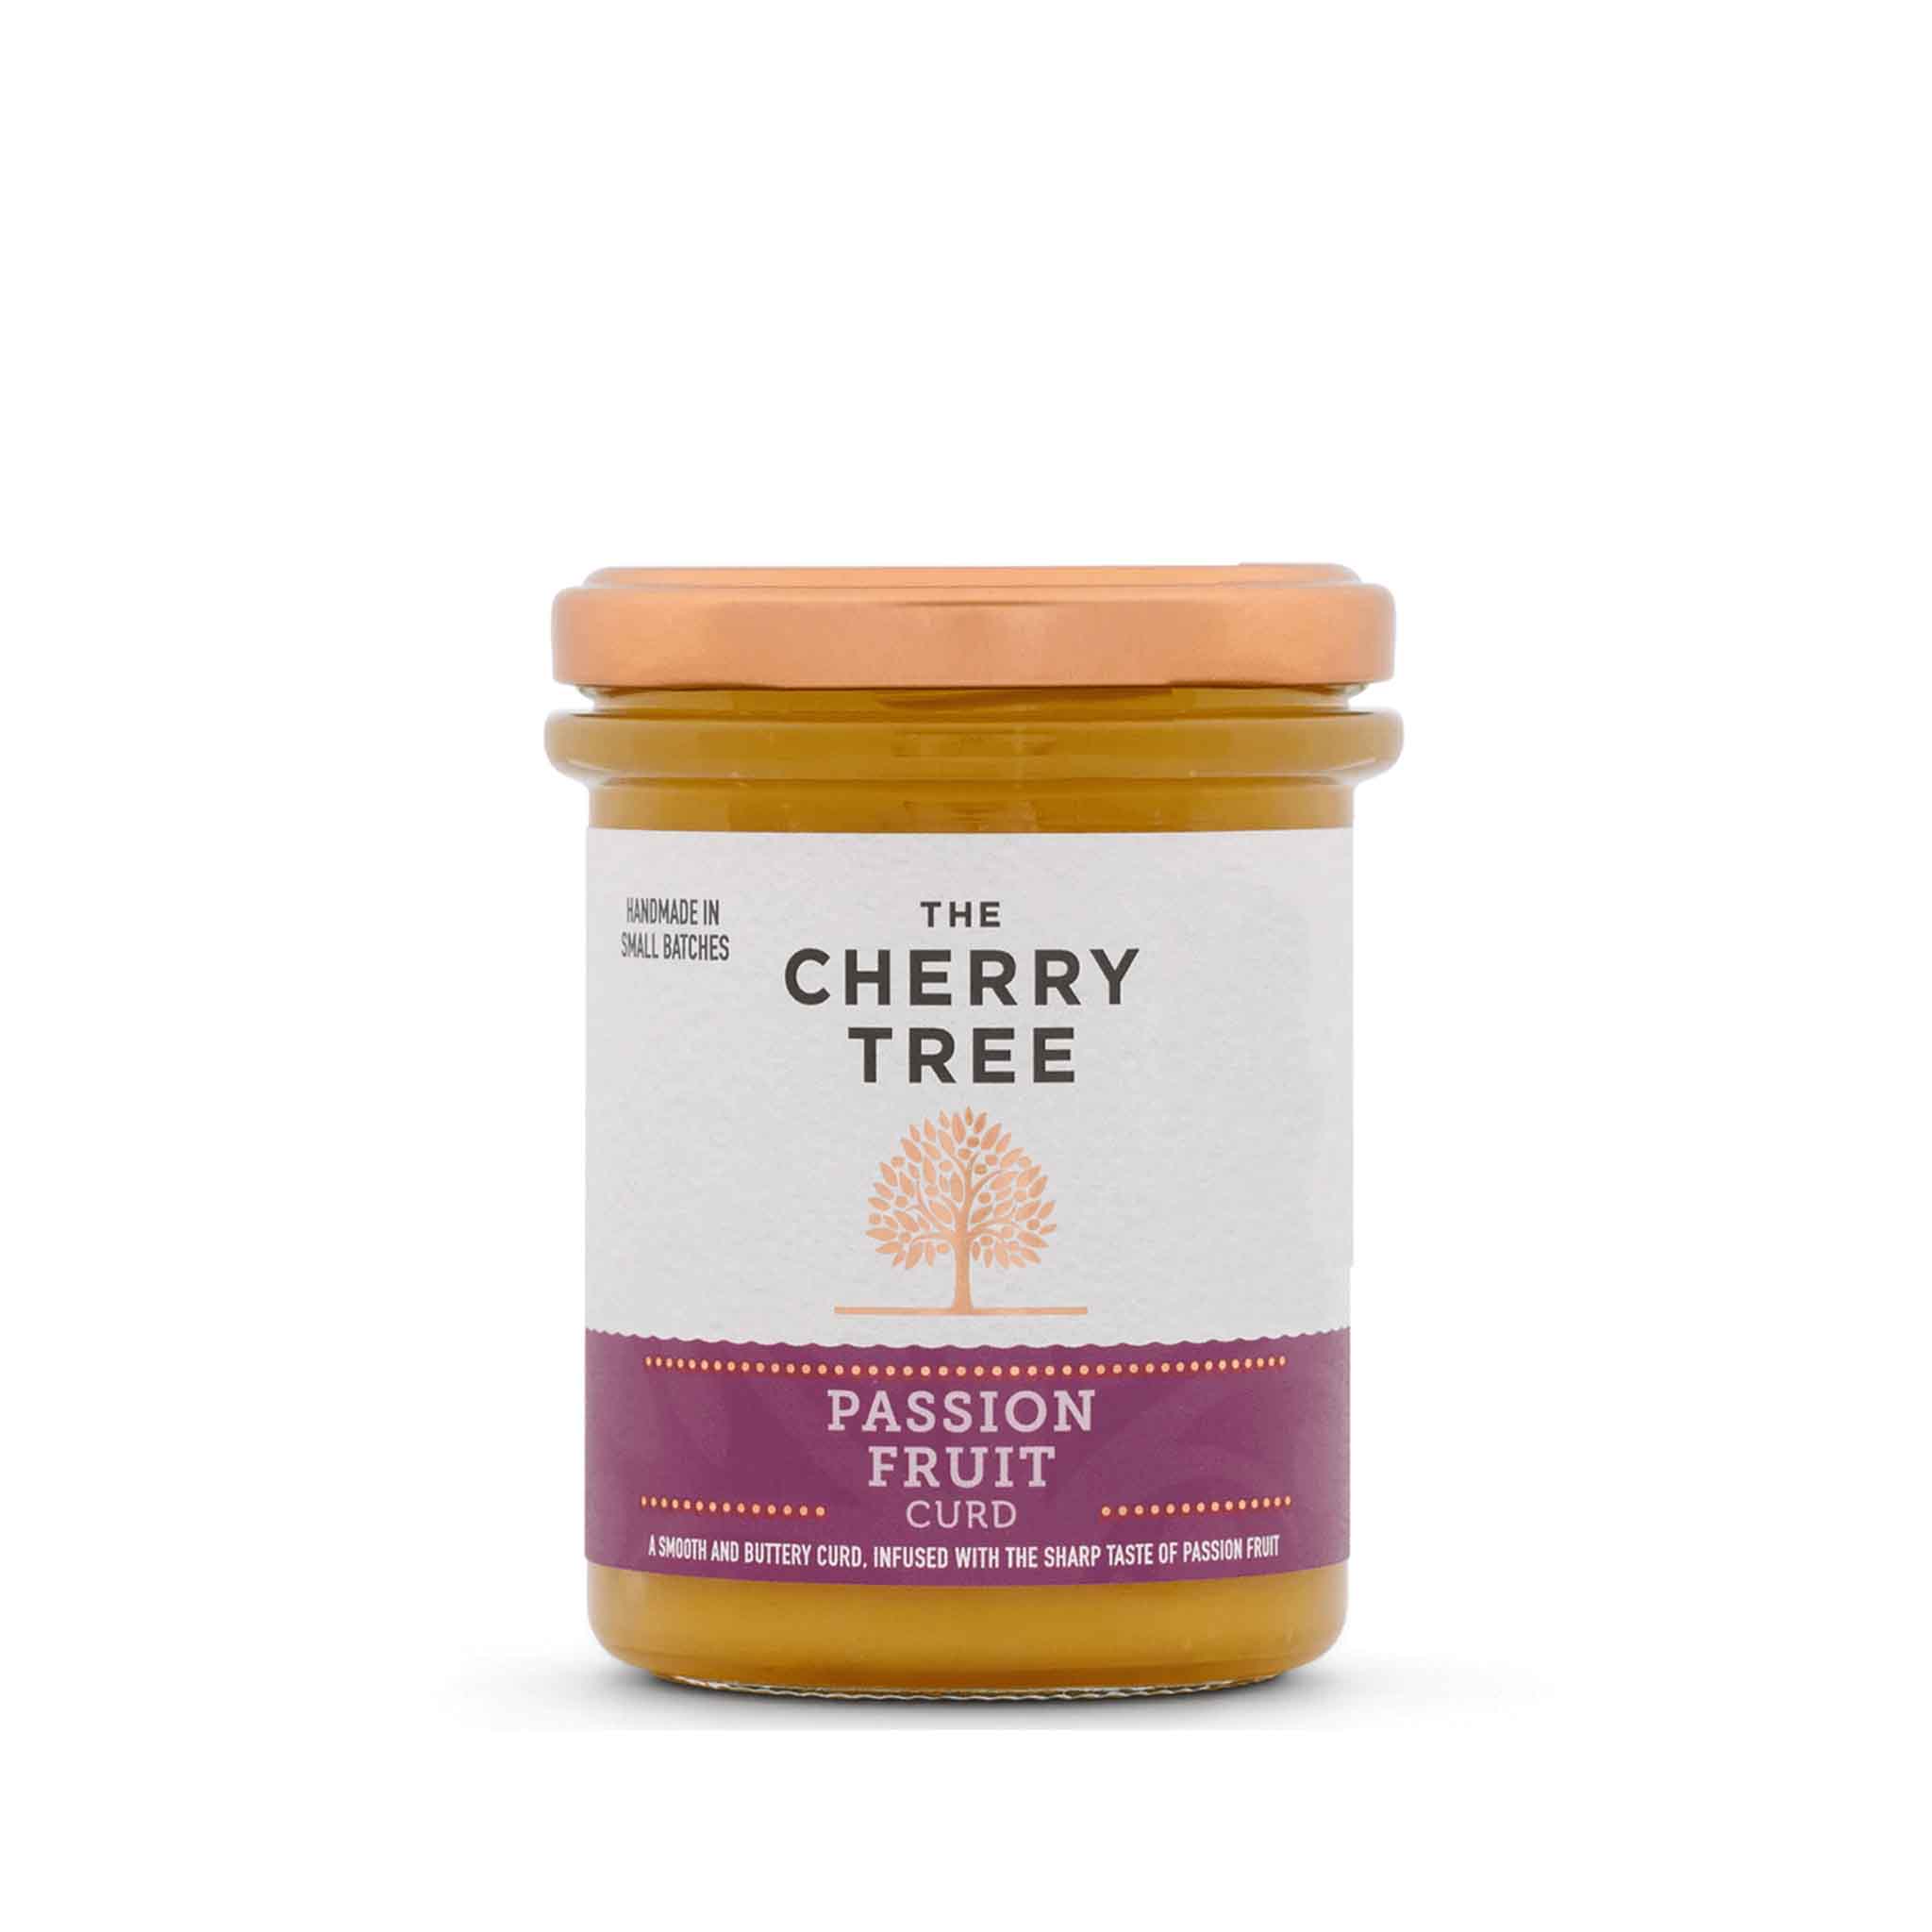 CHERRY TREE PASSION FRUIT CURD 210g